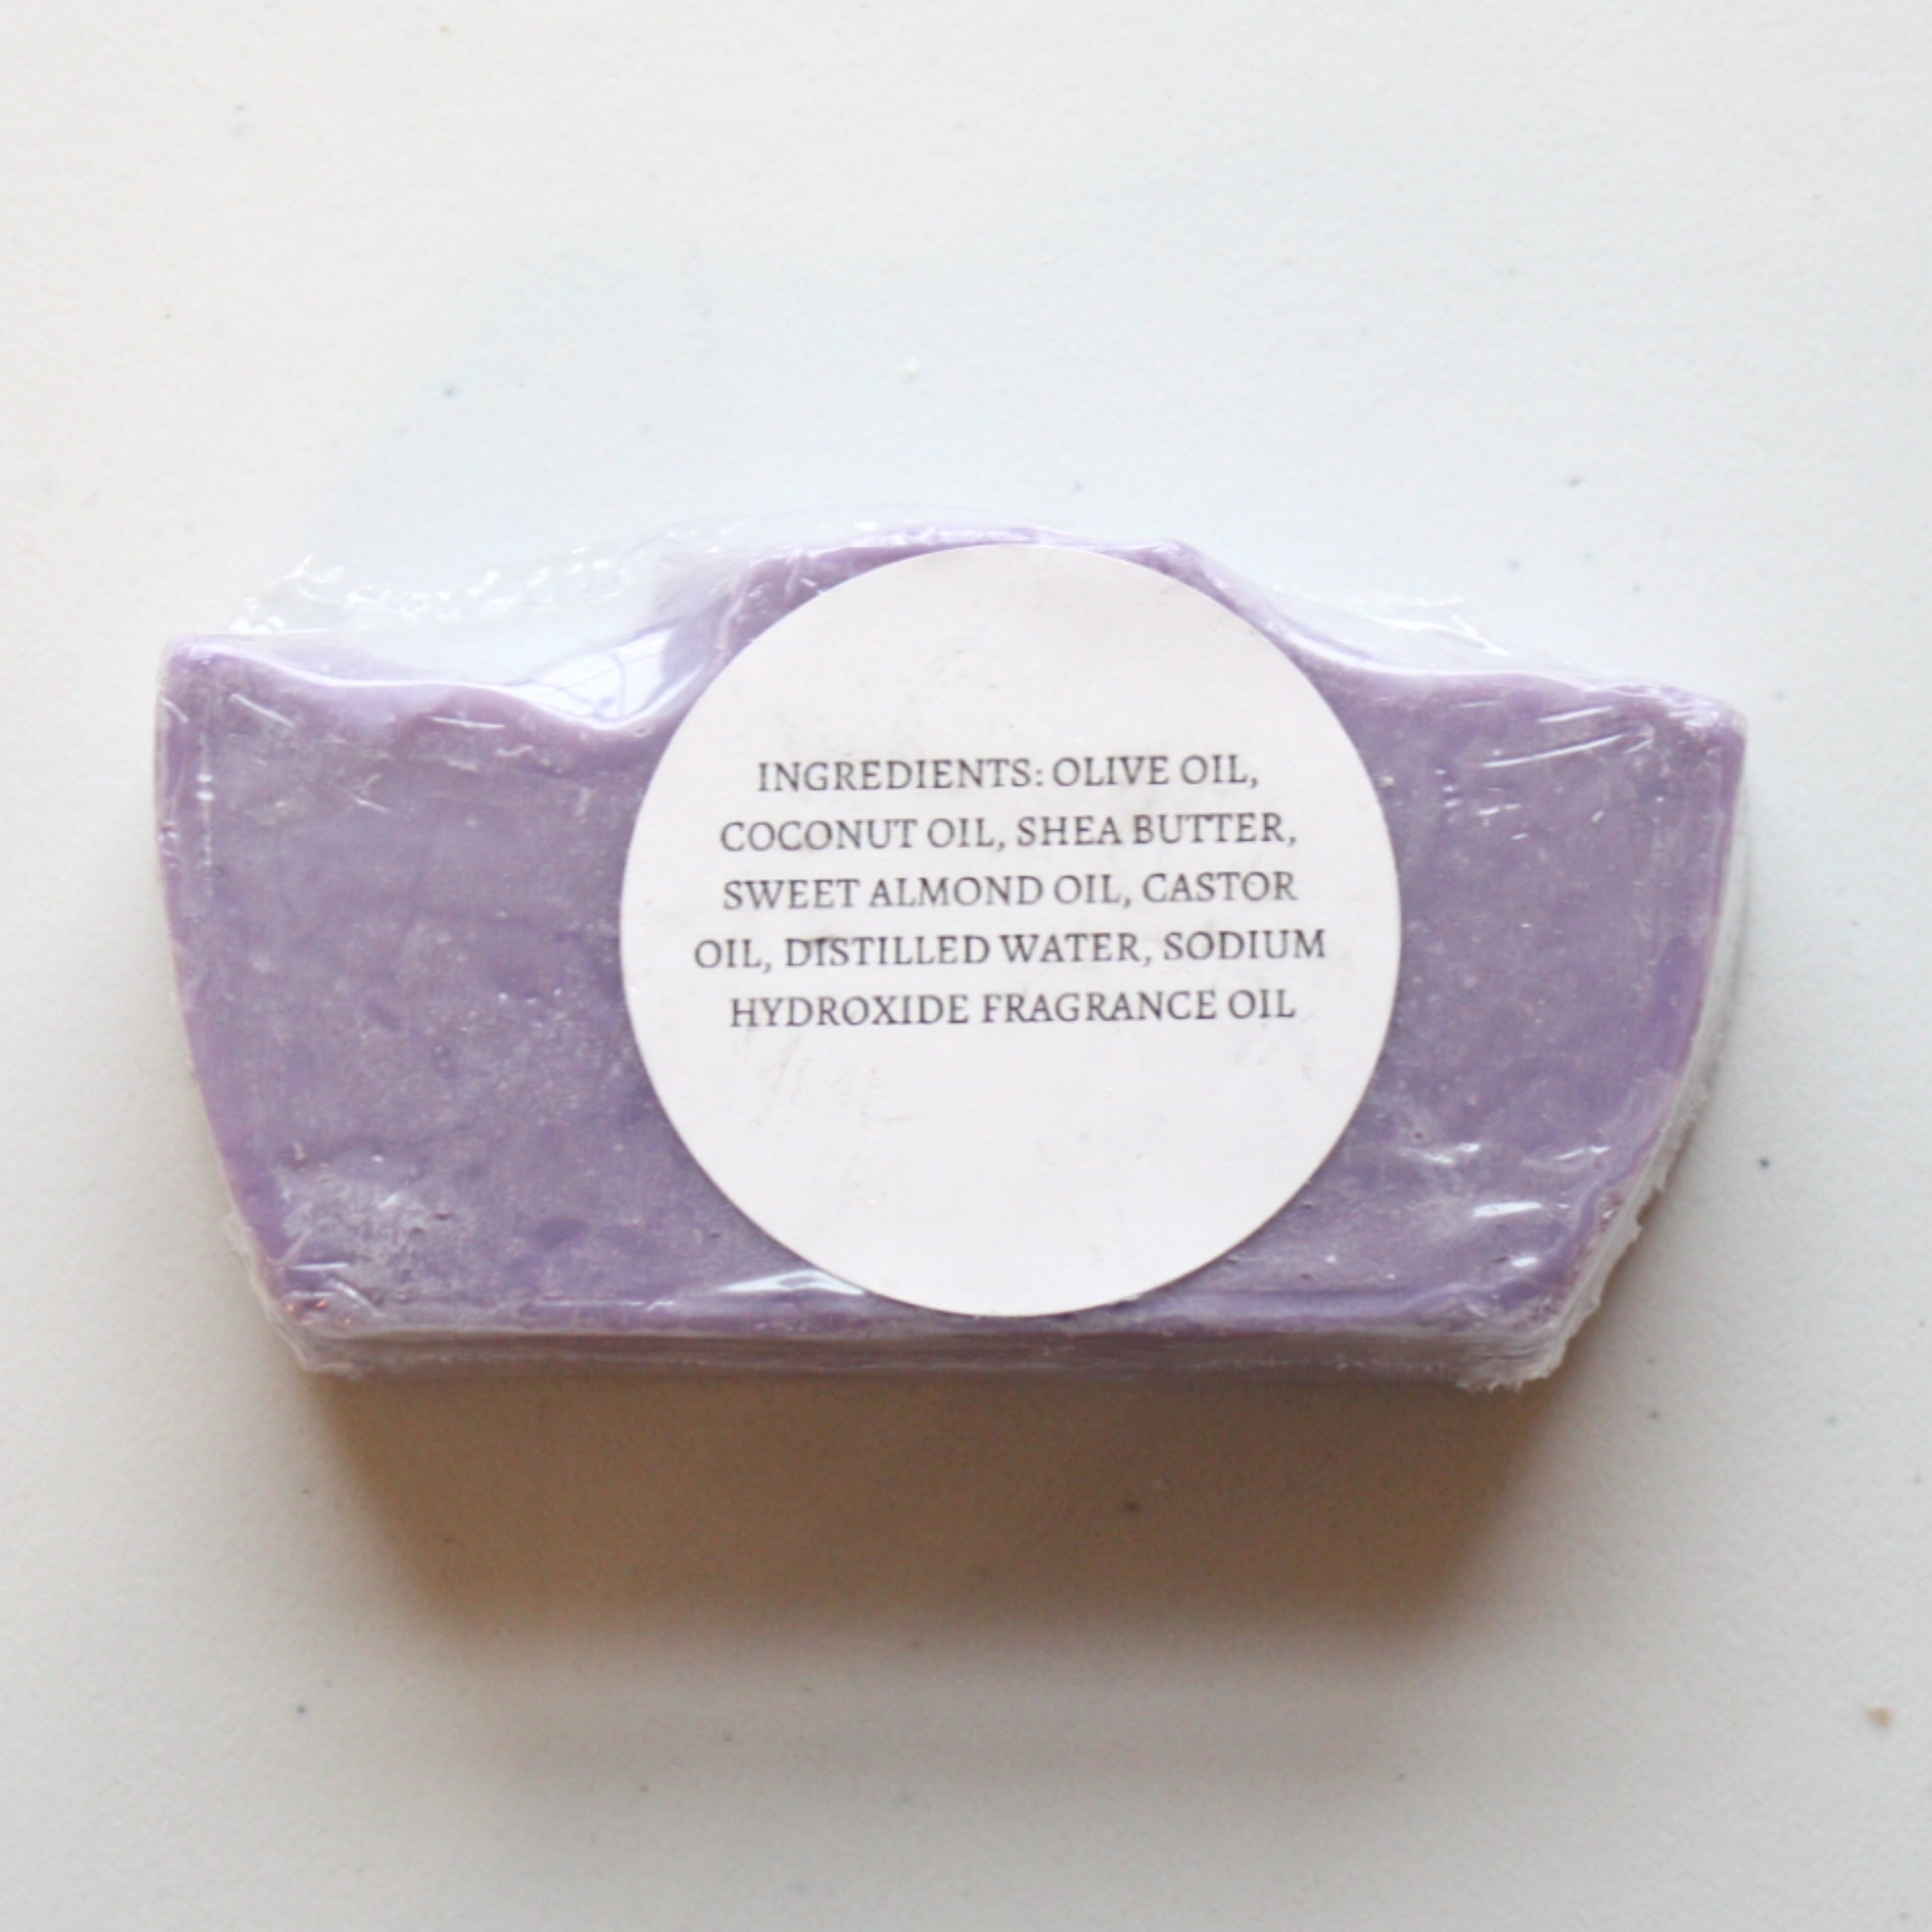 Lovely Lavender Bubbly Handmade Soap - Made in the USA